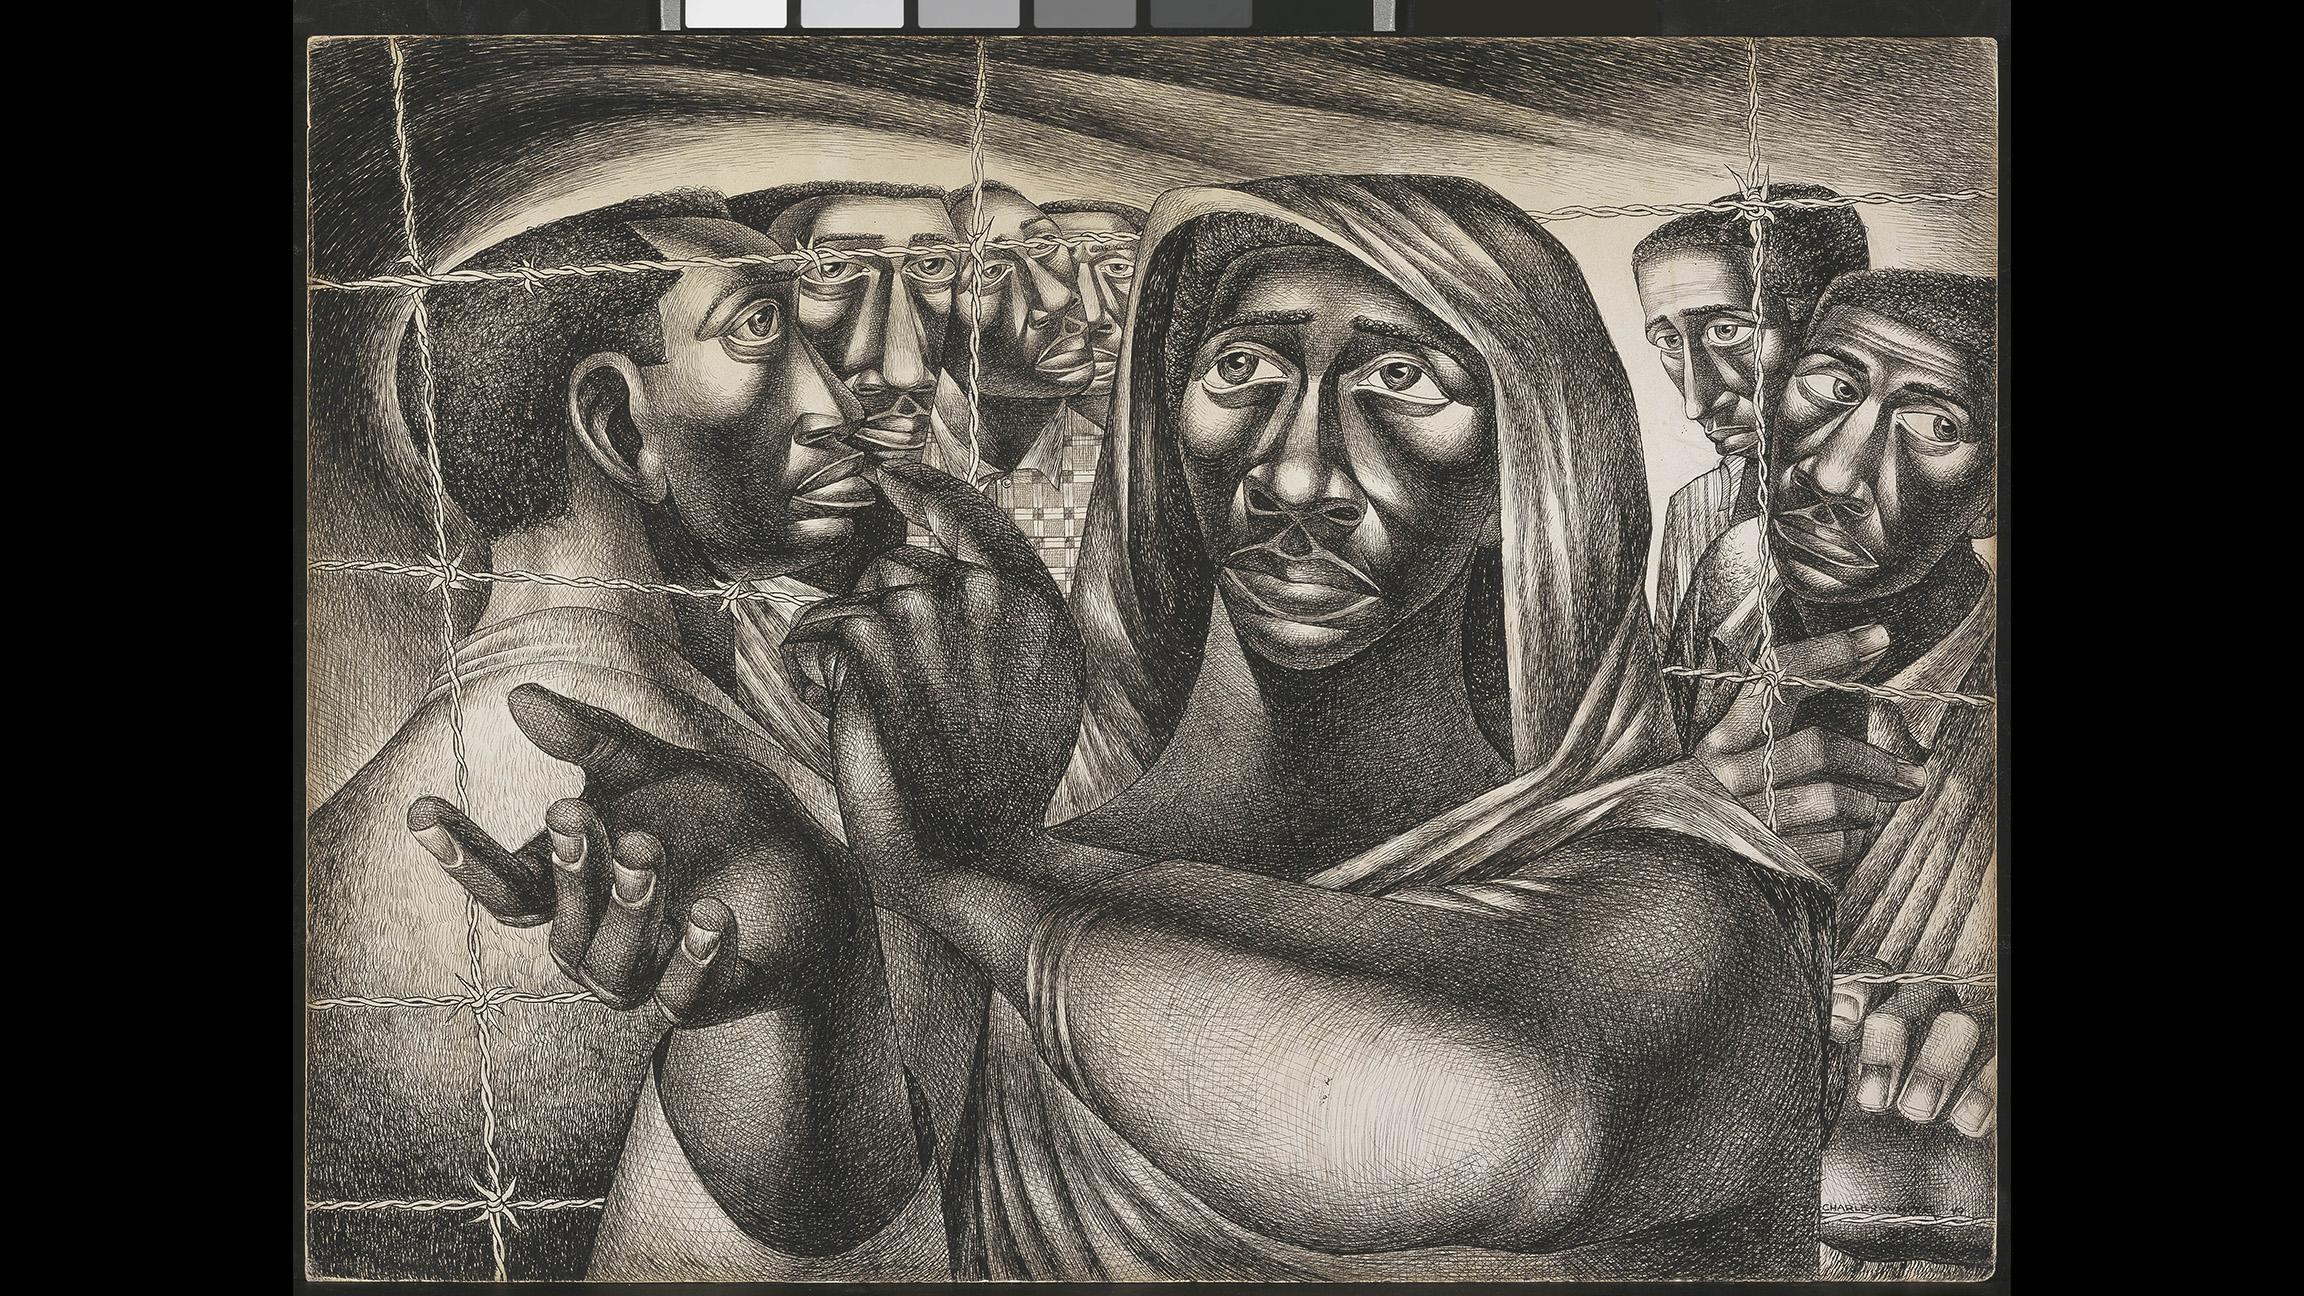 Charles White. “Trenton Six,” 1949. Amon Carter Museum of American Art, Fort Worth, TX. (© The Charles White Archives Inc.)